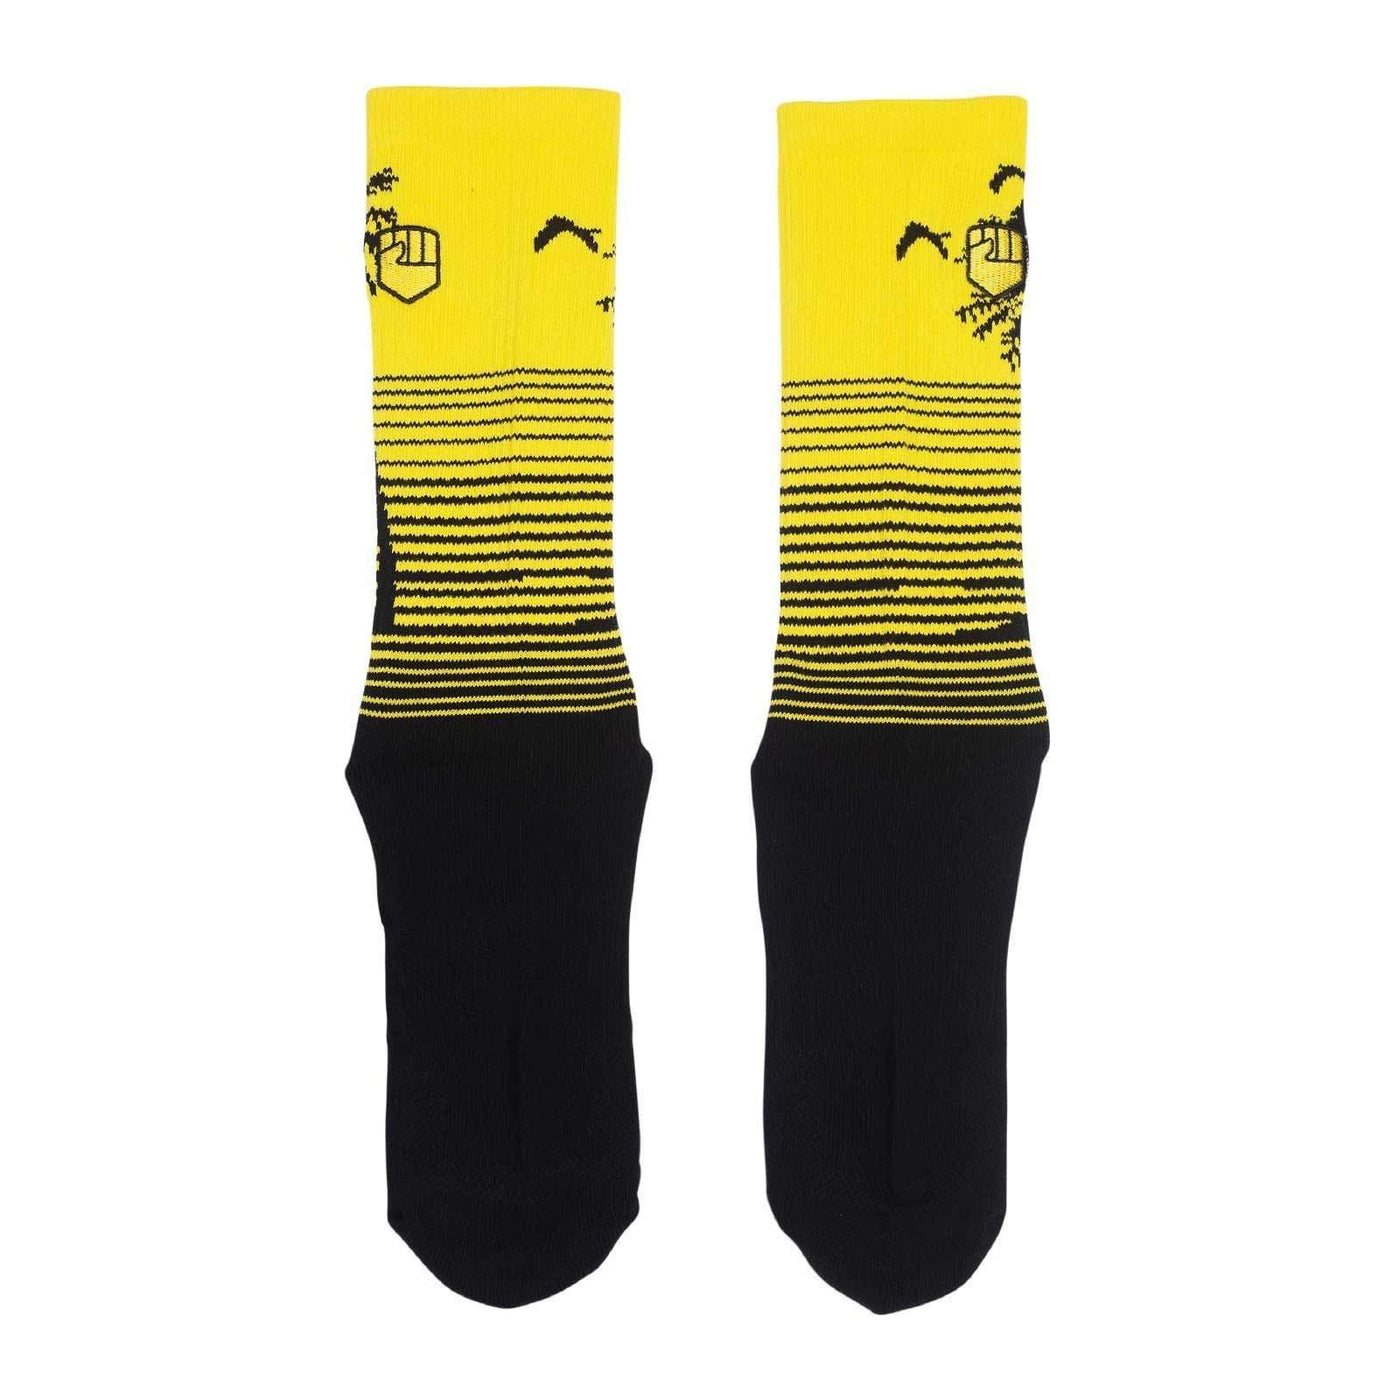 FIST Crew Socks - Miami Phase 2 8Lines Shop - Fast Shipping